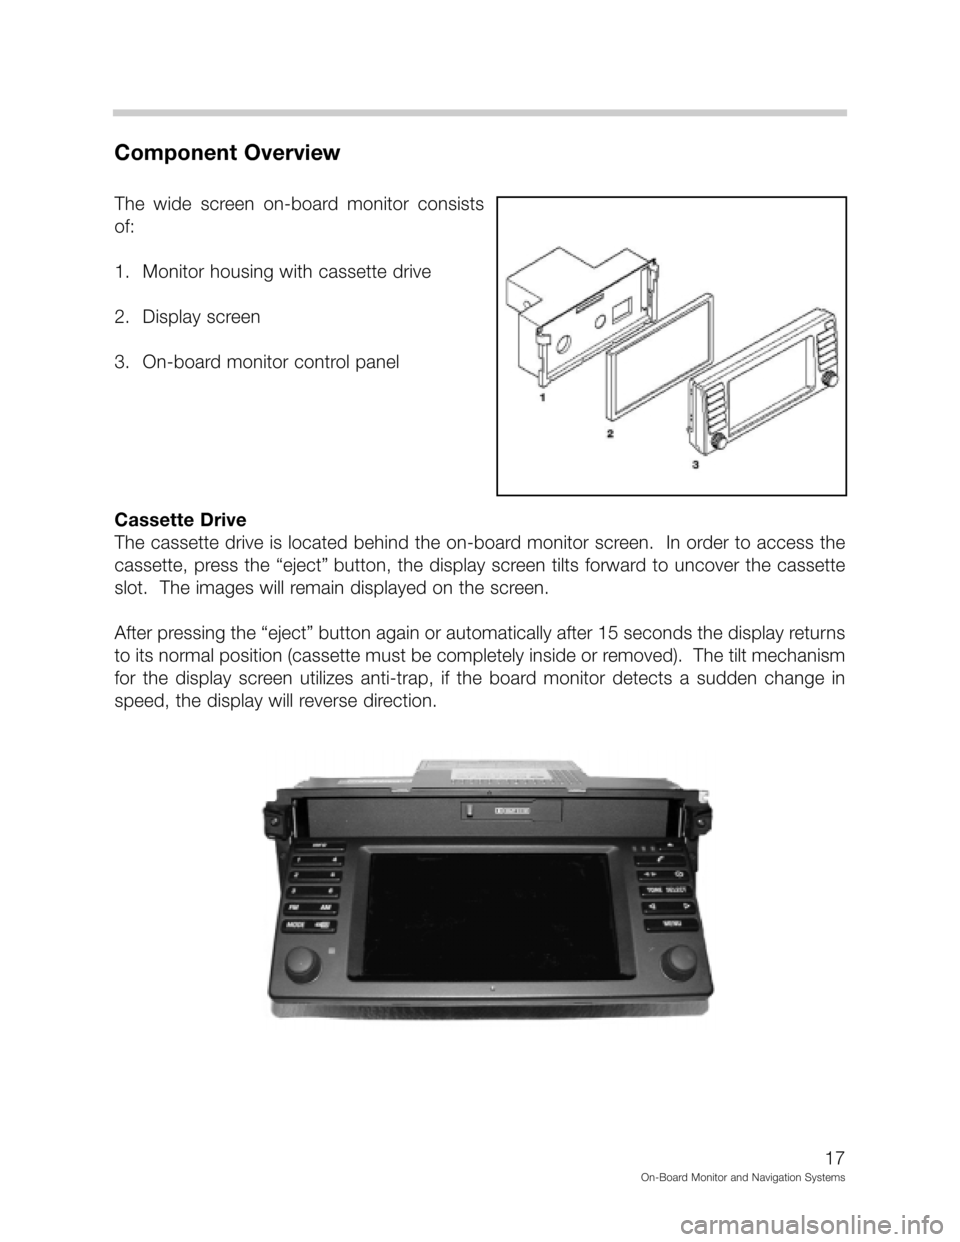 BMW 3 SERIES 2002 E46 On Board Monitor System User Guide *,



"&
(	
2./!!,, 7
# % 
 
 	
 


* 

%&
 

. 
	


